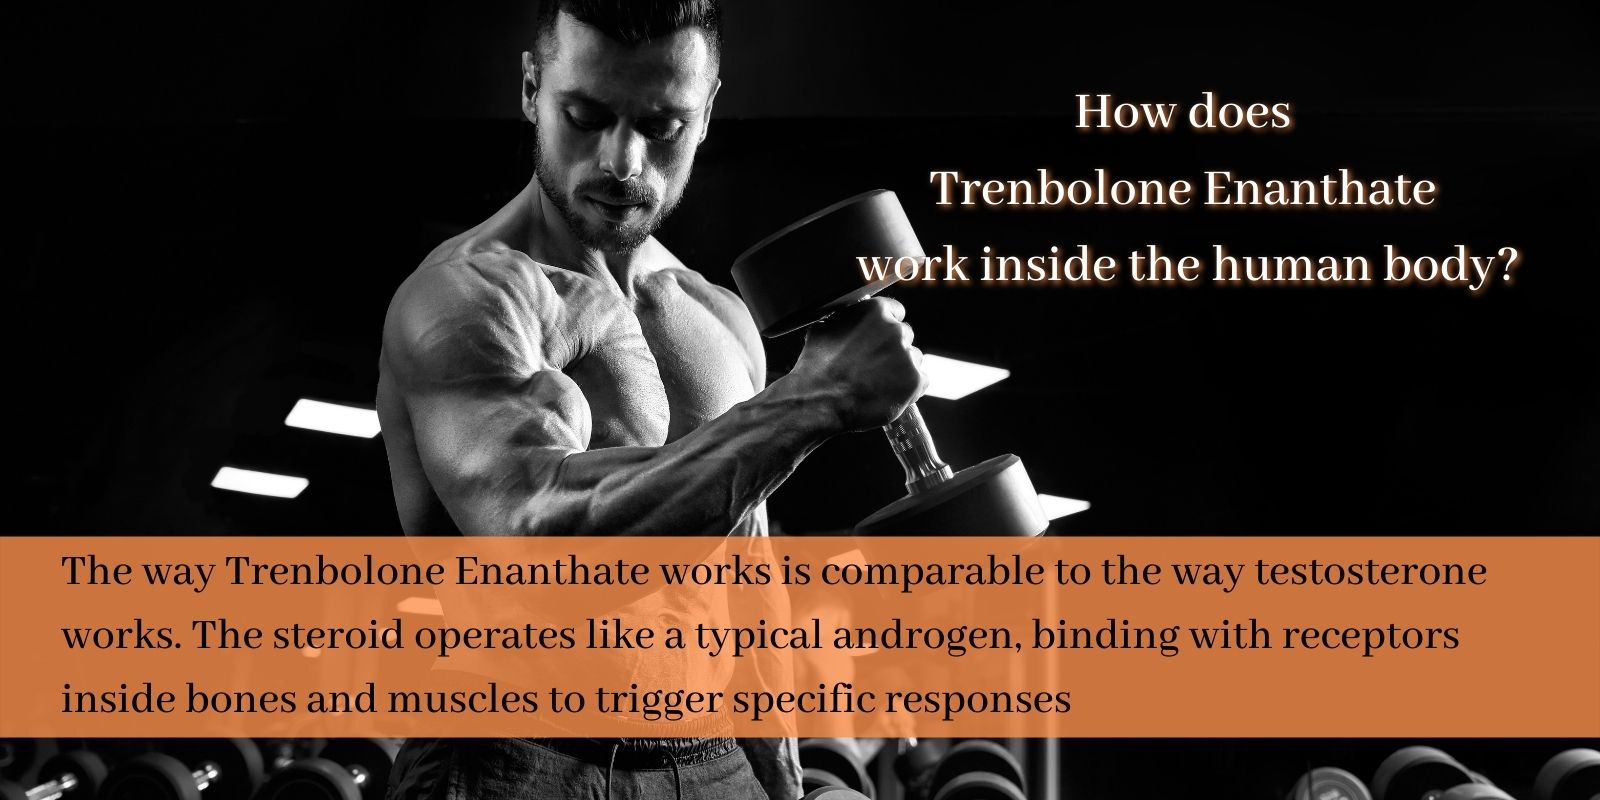 How does Trenbolone Enanthate work inside the human body_